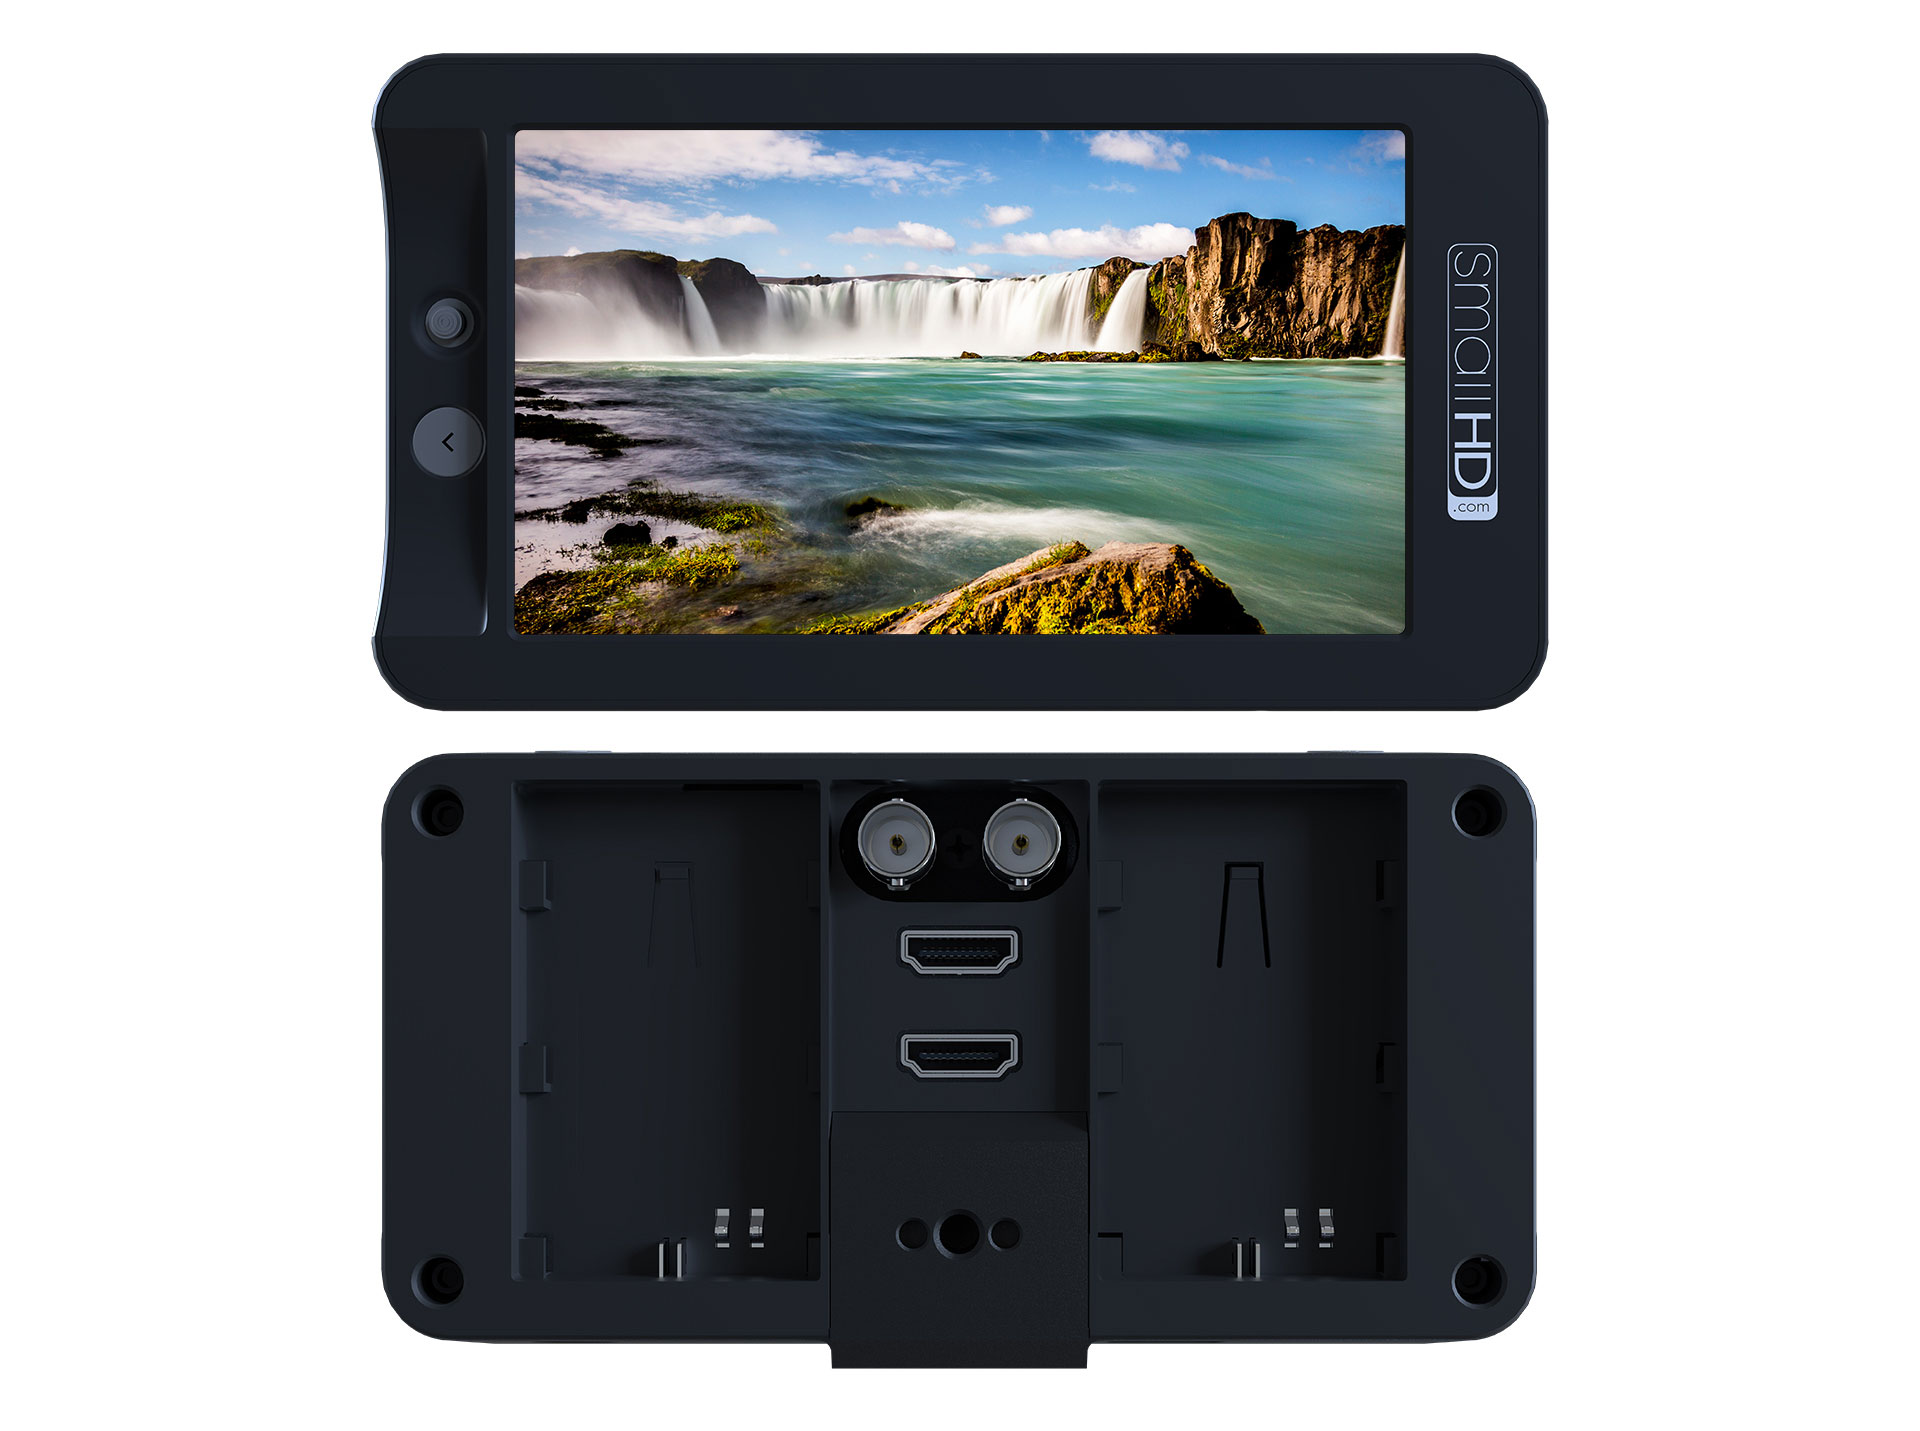 SmallHD 502 Bright front and rear view